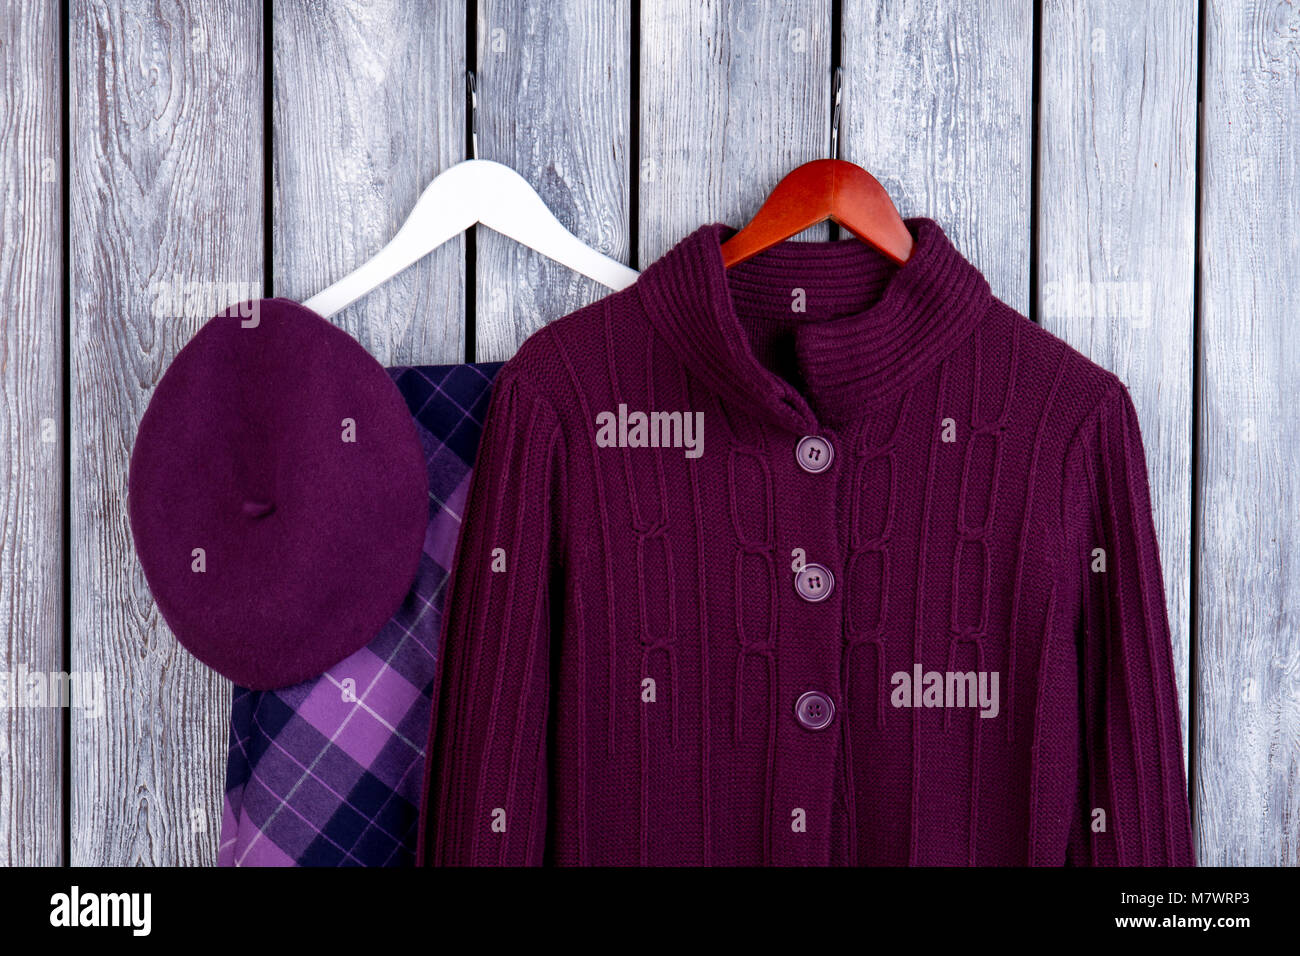 Purple winter outfits for girls. Flat lay, wool cardigan, hat and skirt. Dark wooden desk surface background. Stock Photo